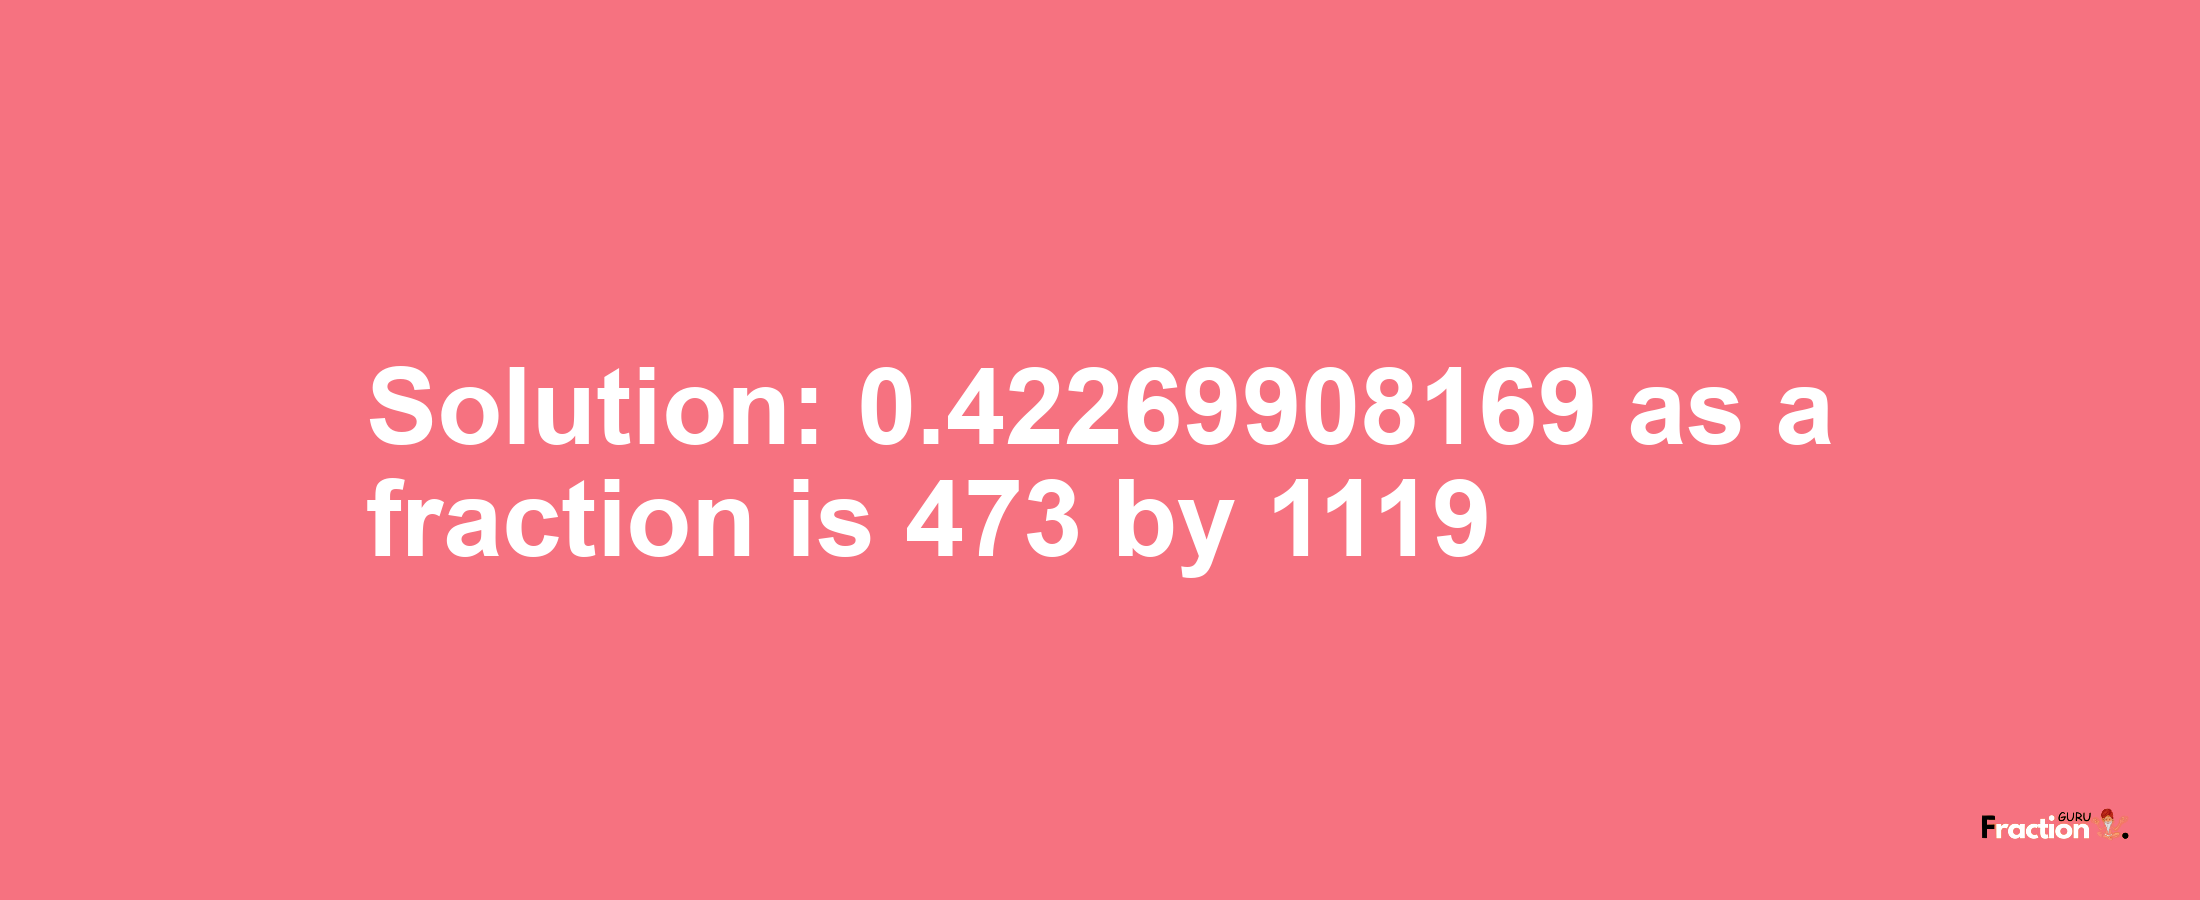 Solution:0.42269908169 as a fraction is 473/1119